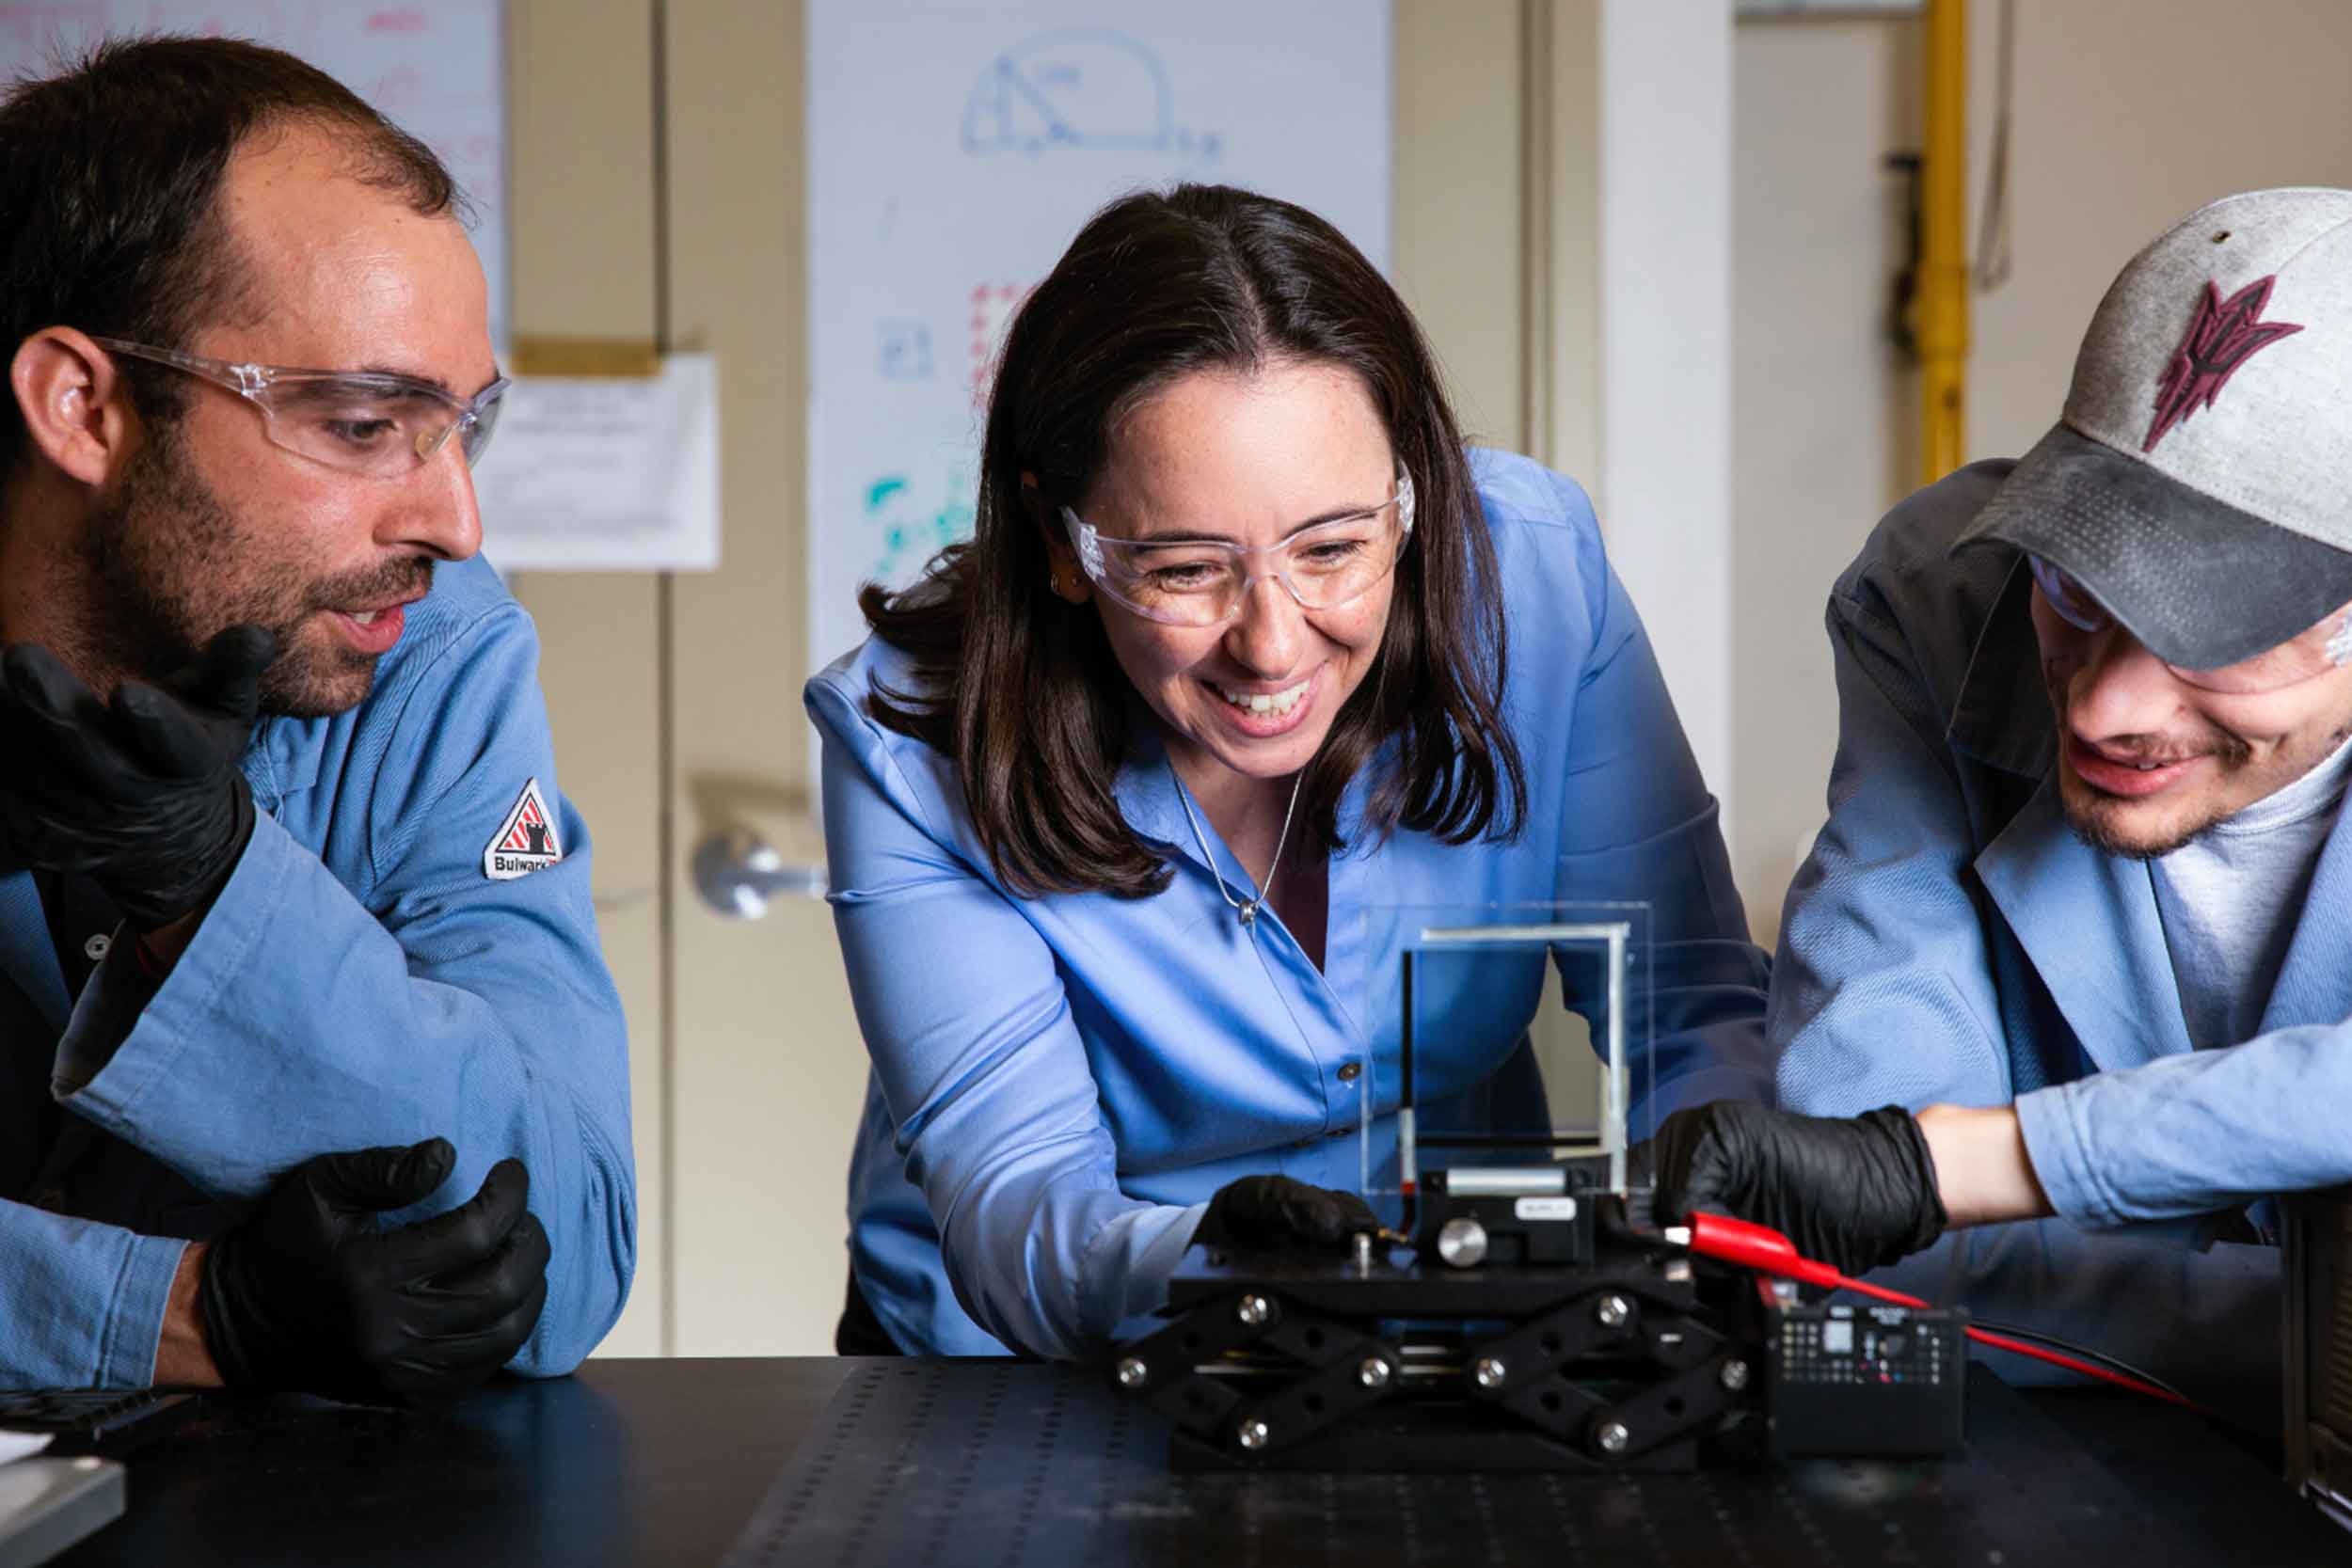 Mariana Bertoni and two researchers lean in at the lab bench looking at a device they are working on